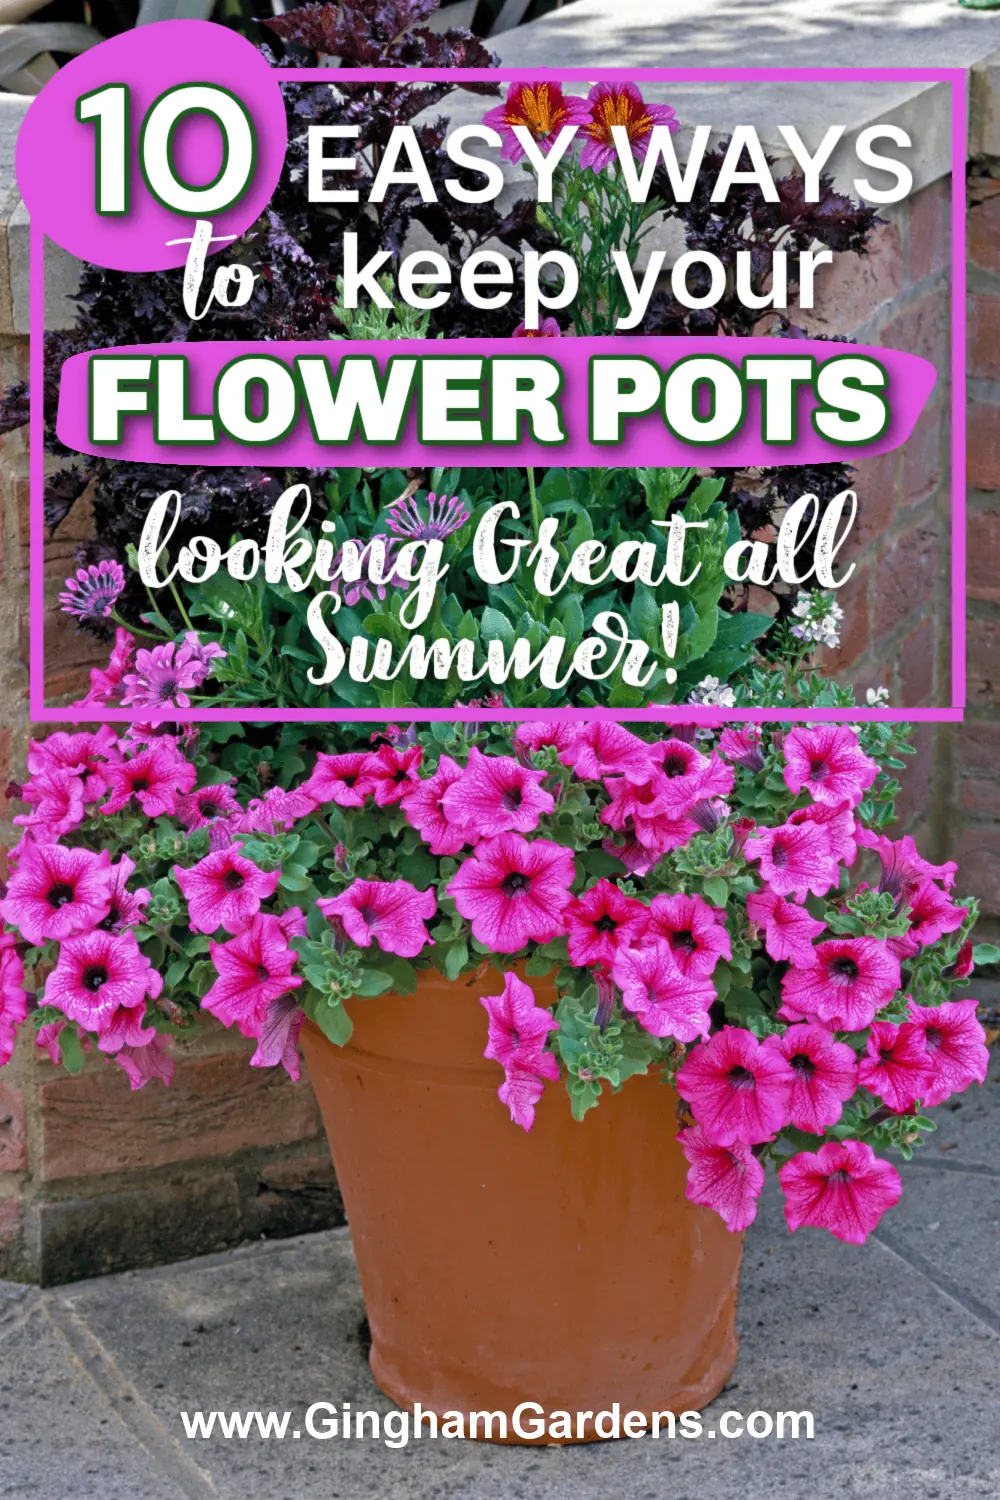 Colorful magenta colored petunias in a flower pot with text overlay - 10 ways to keep your flower pots looking great all summer!